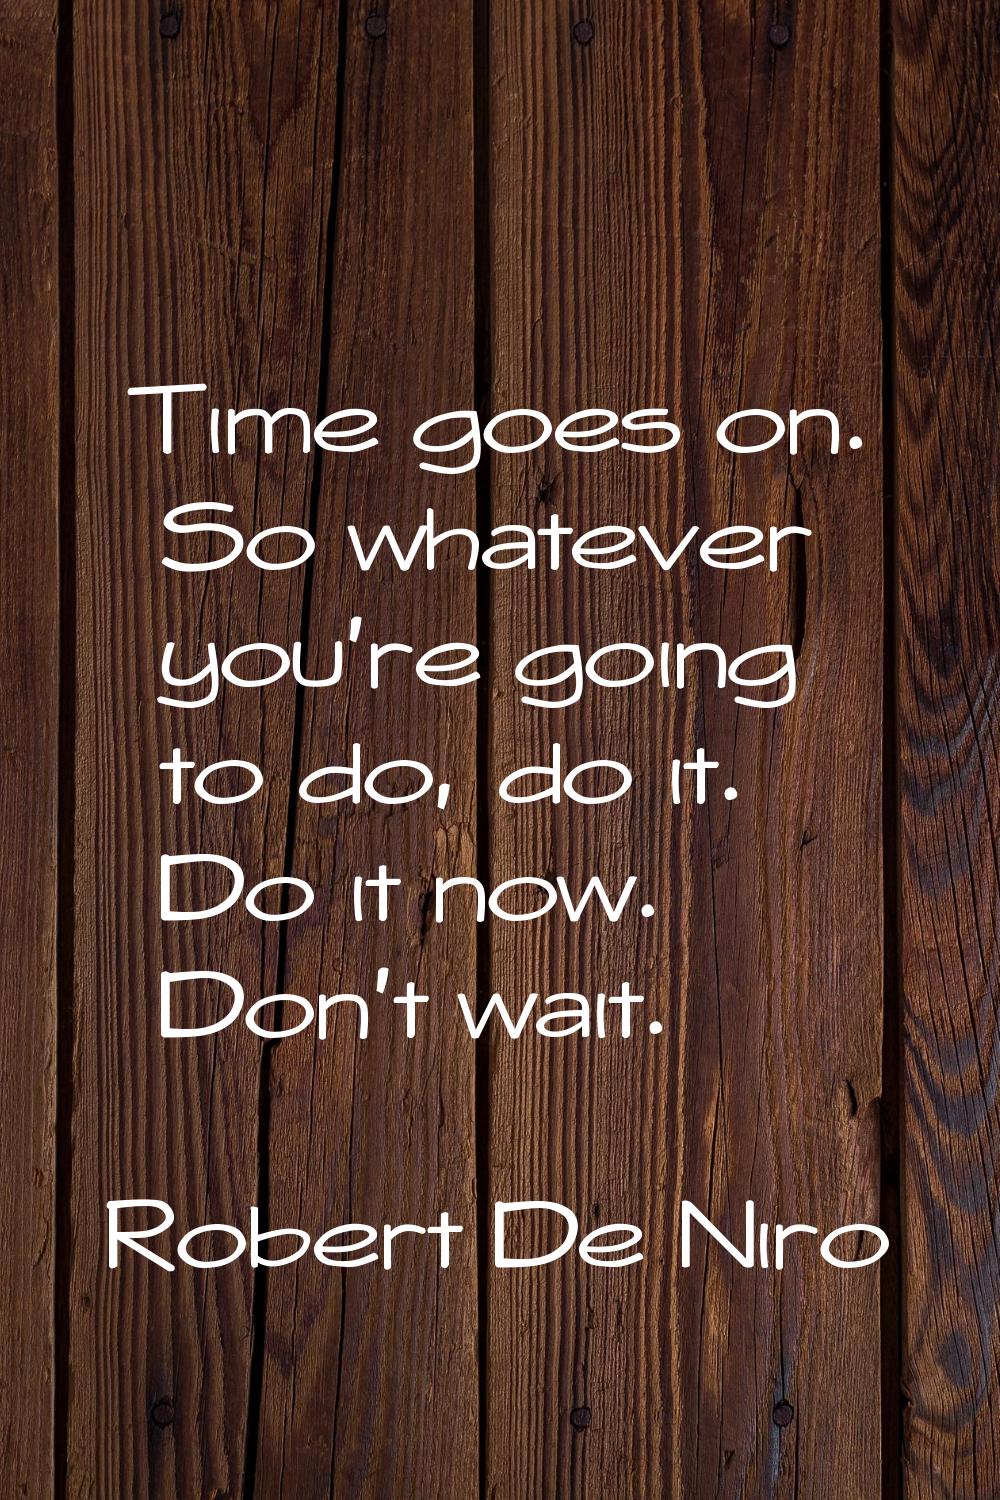 Time goes on. So whatever you're going to do, do it. Do it now. Don't wait.